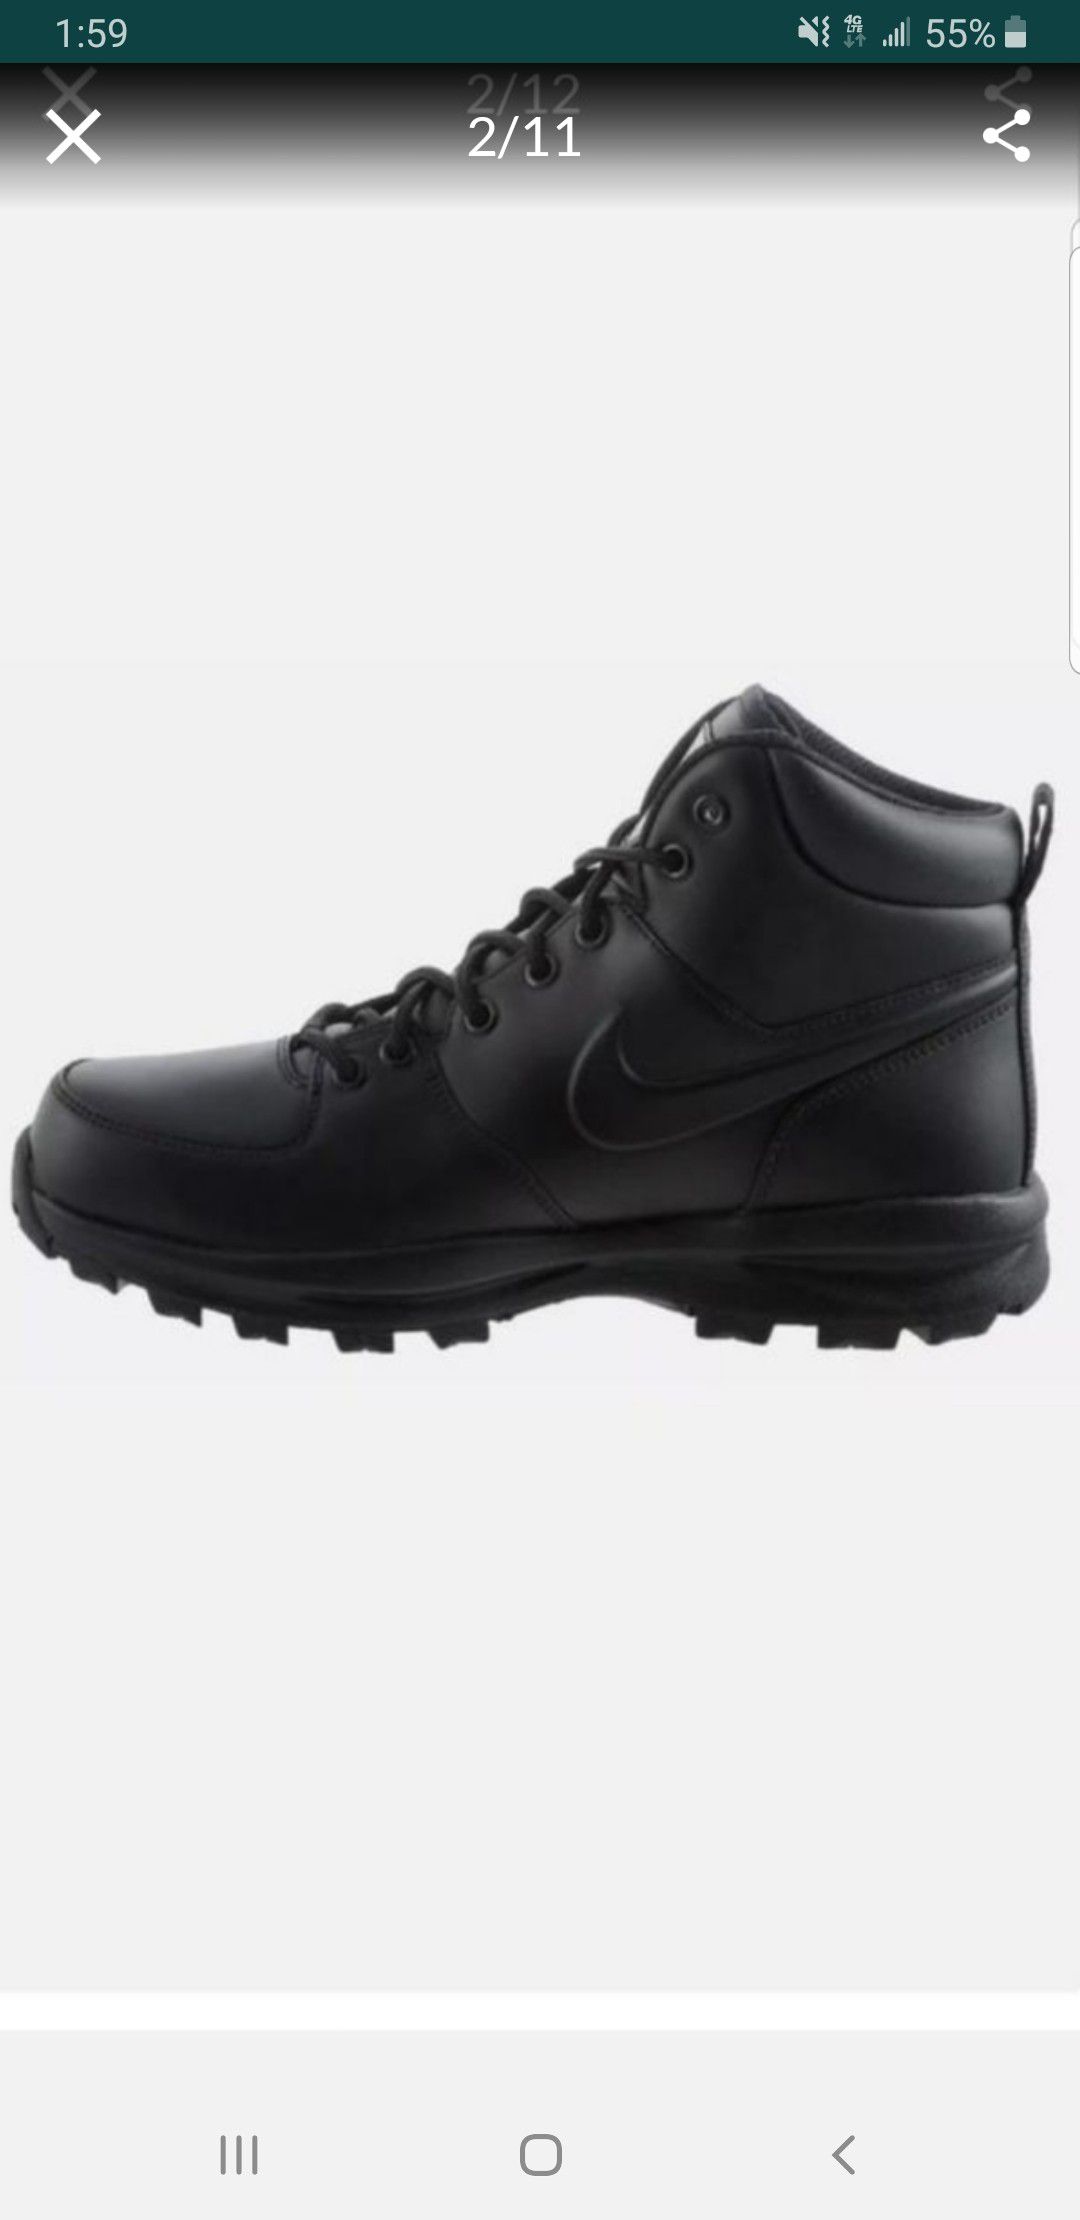 NIKE MANOA LEATHER WORK BOOTS MEN'S CASUAL WINTERIZED ACG TRIPLE SIZE 9 BLACK/BLACK HIGH TOP BRAND NEW WITH TAGS SERIOUS BUYERS ONLY